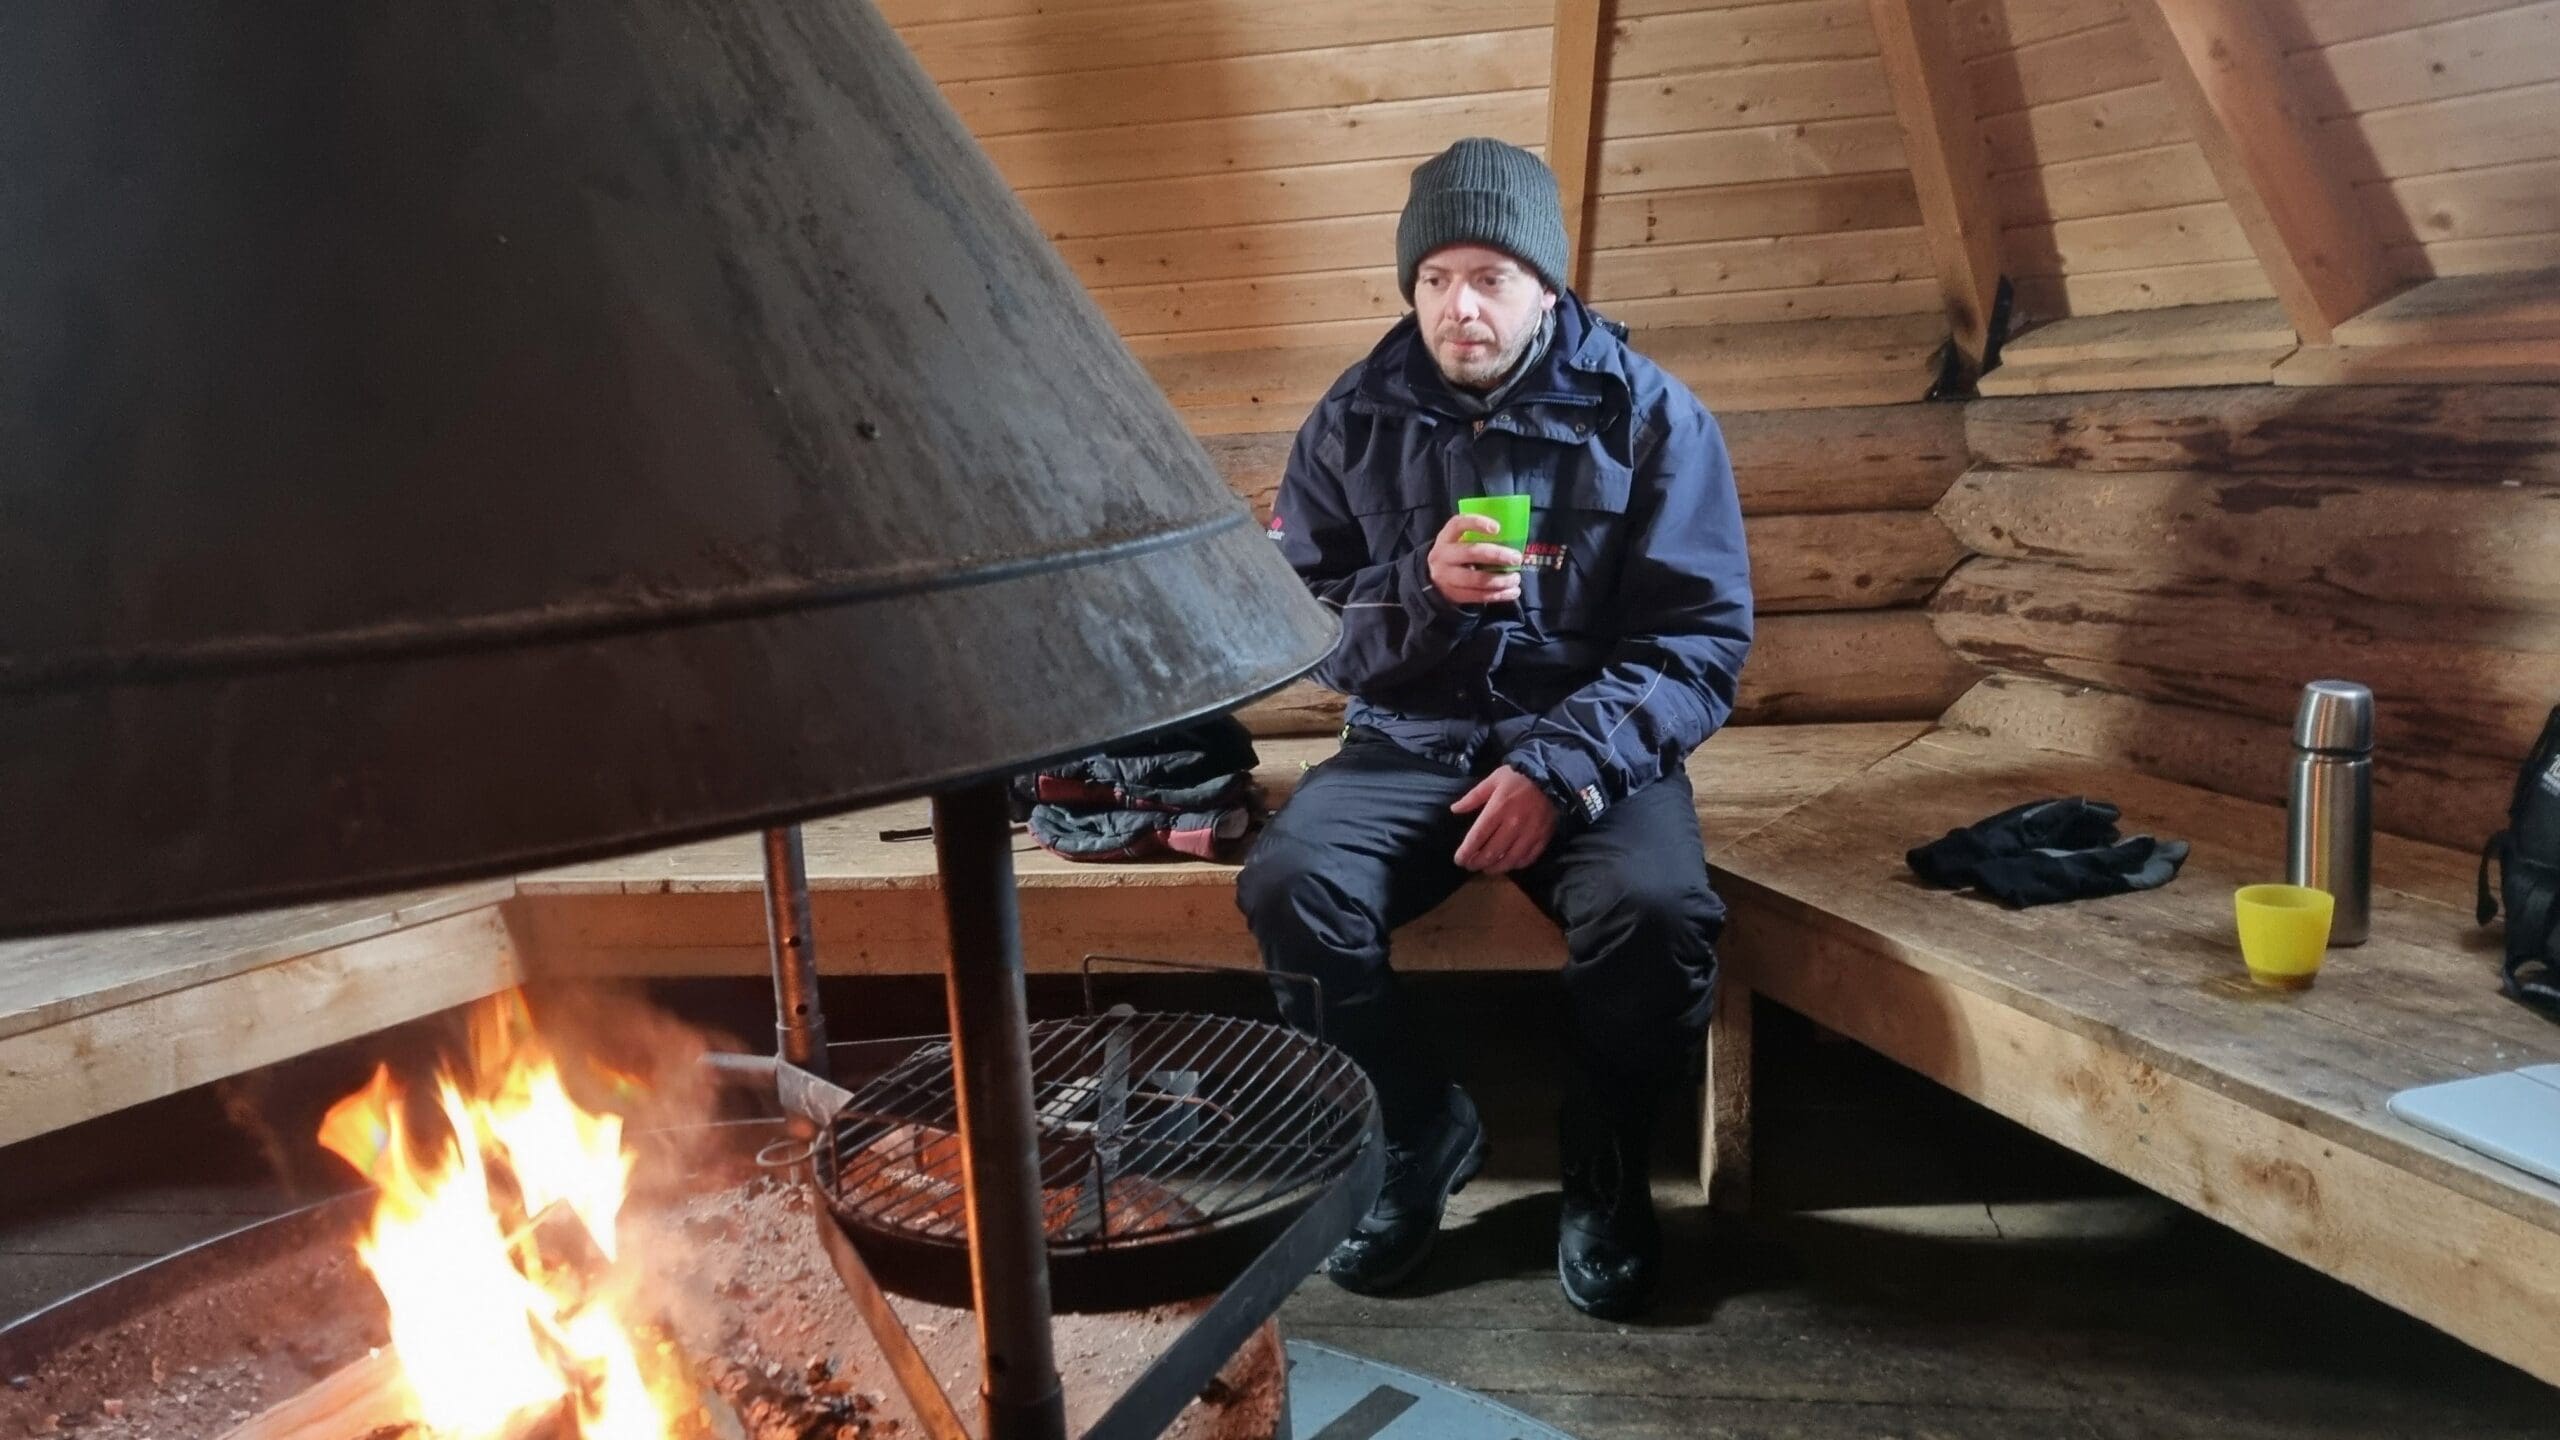 Andy warming up by a Kota fire in Lapland, March 2022